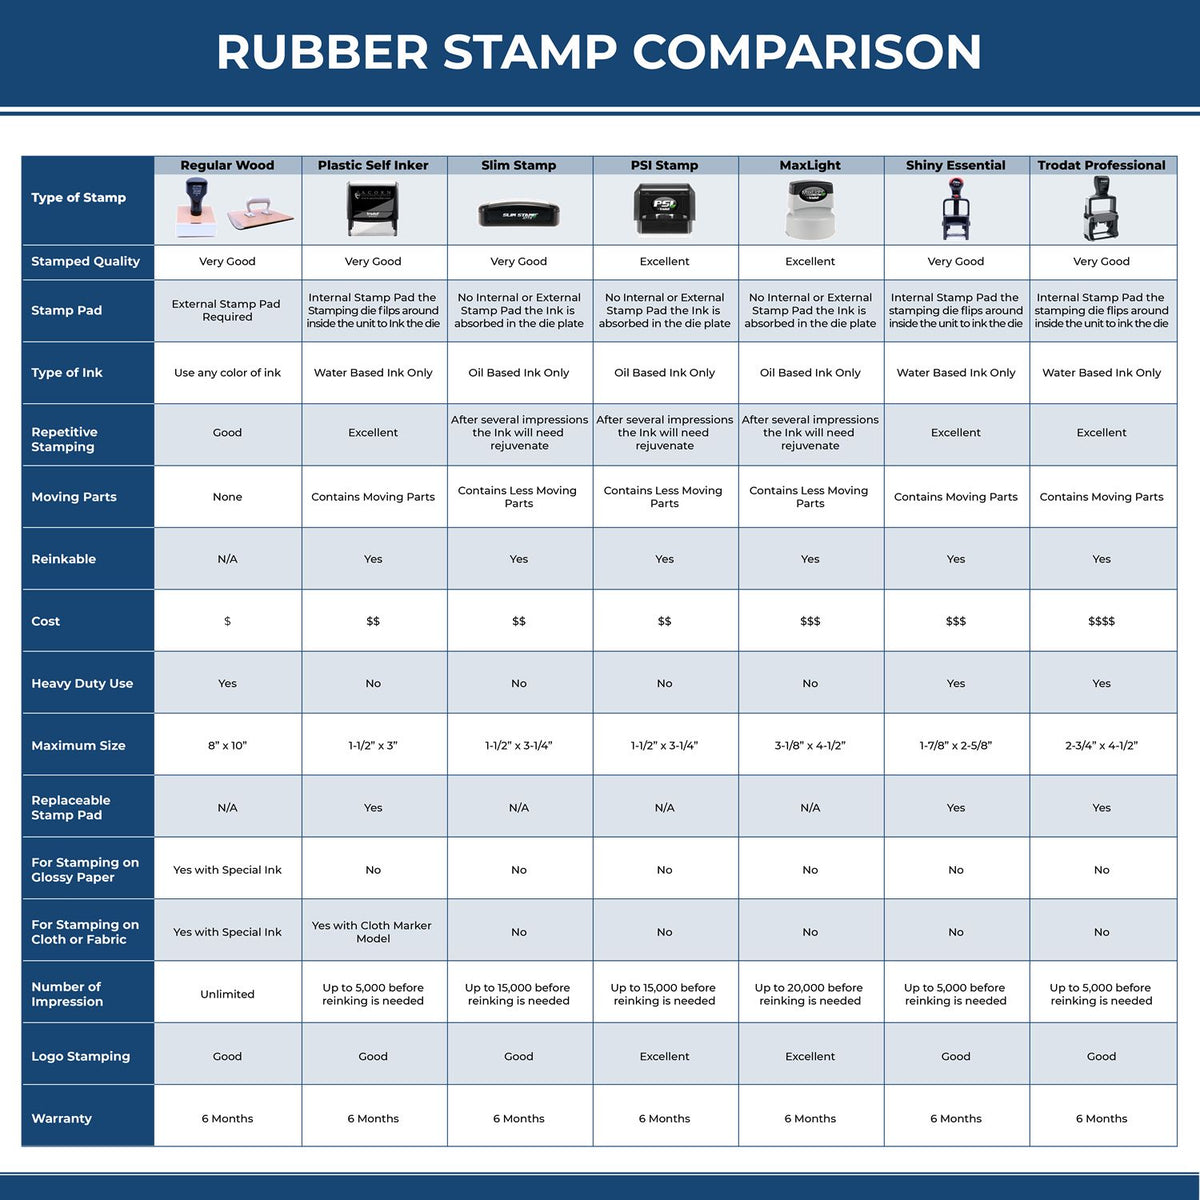 Large Self-Inking Narrow Copy for your Information Stamp 4854S Rubber Stamp Comparison